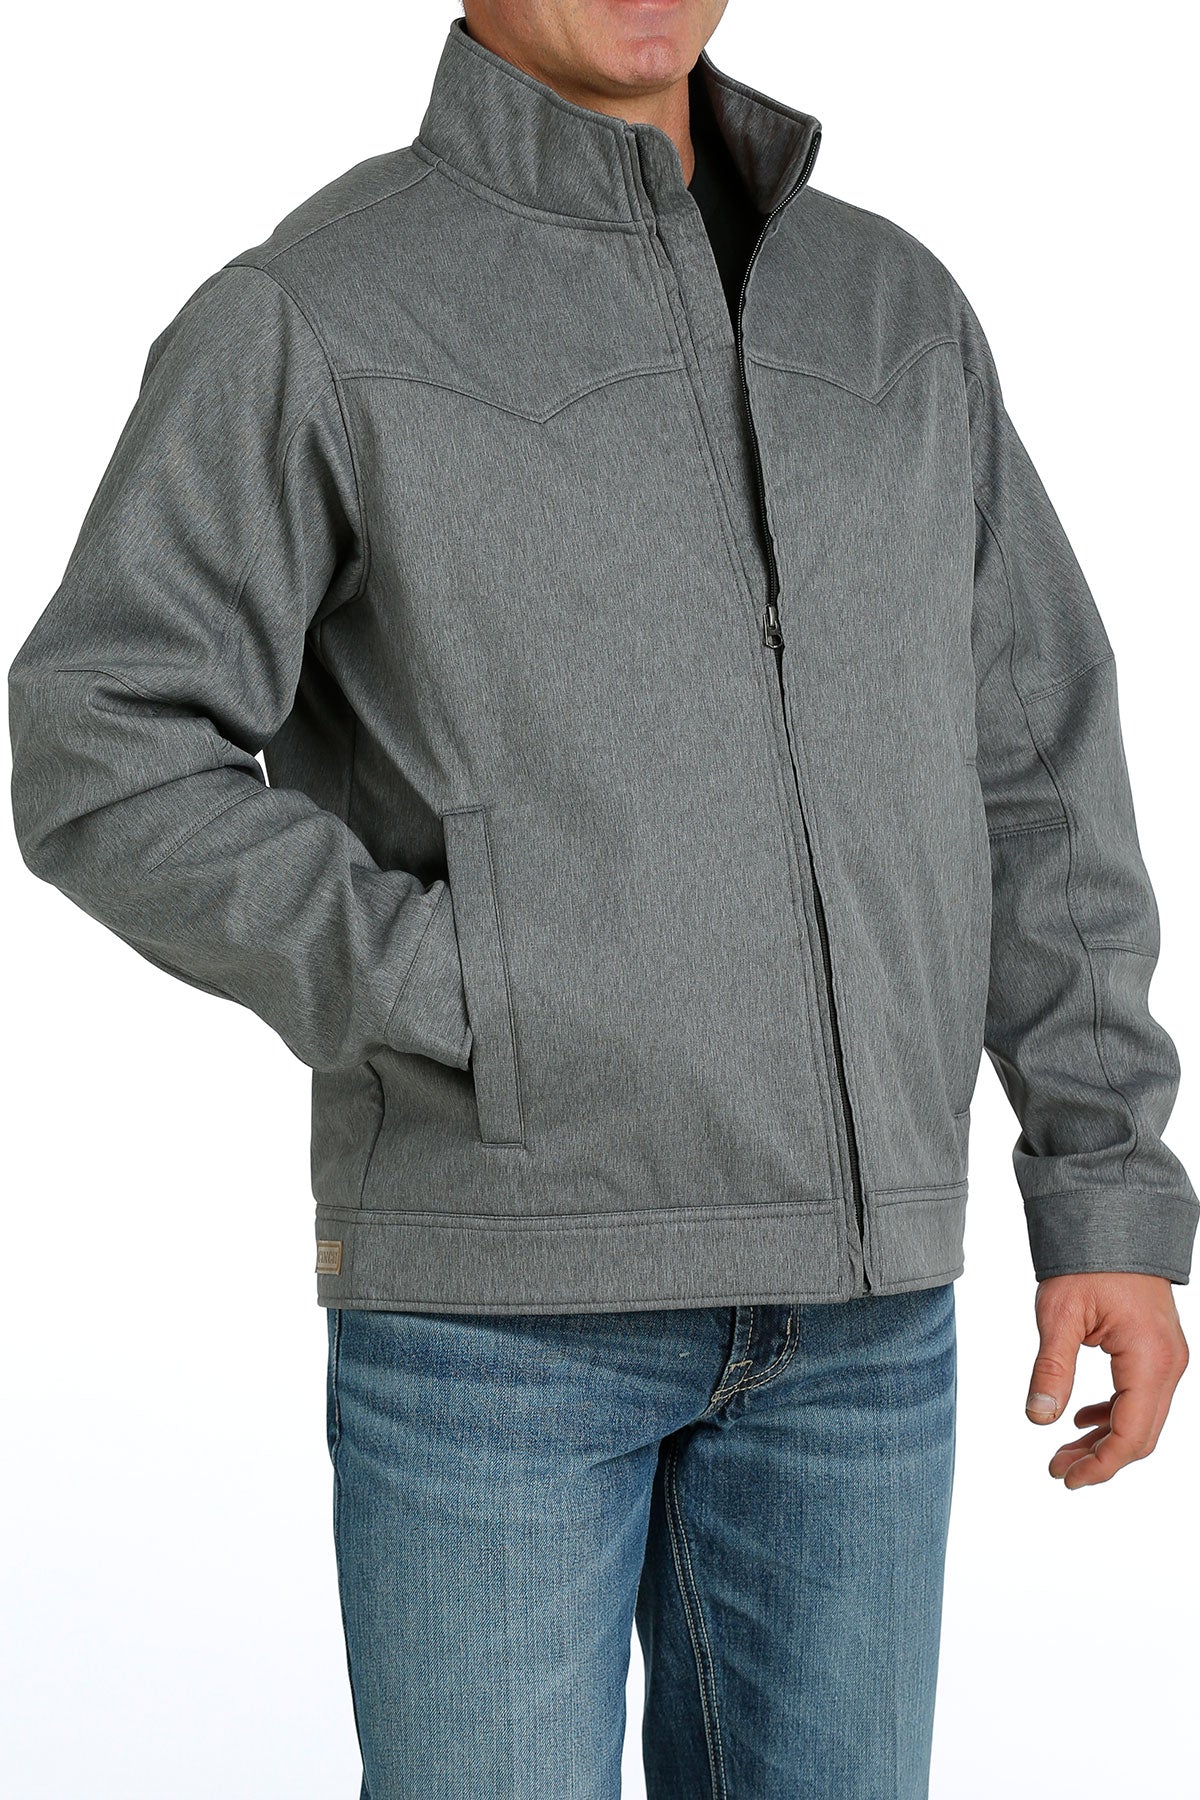 Gray Bonded Carry Conceal Jacket